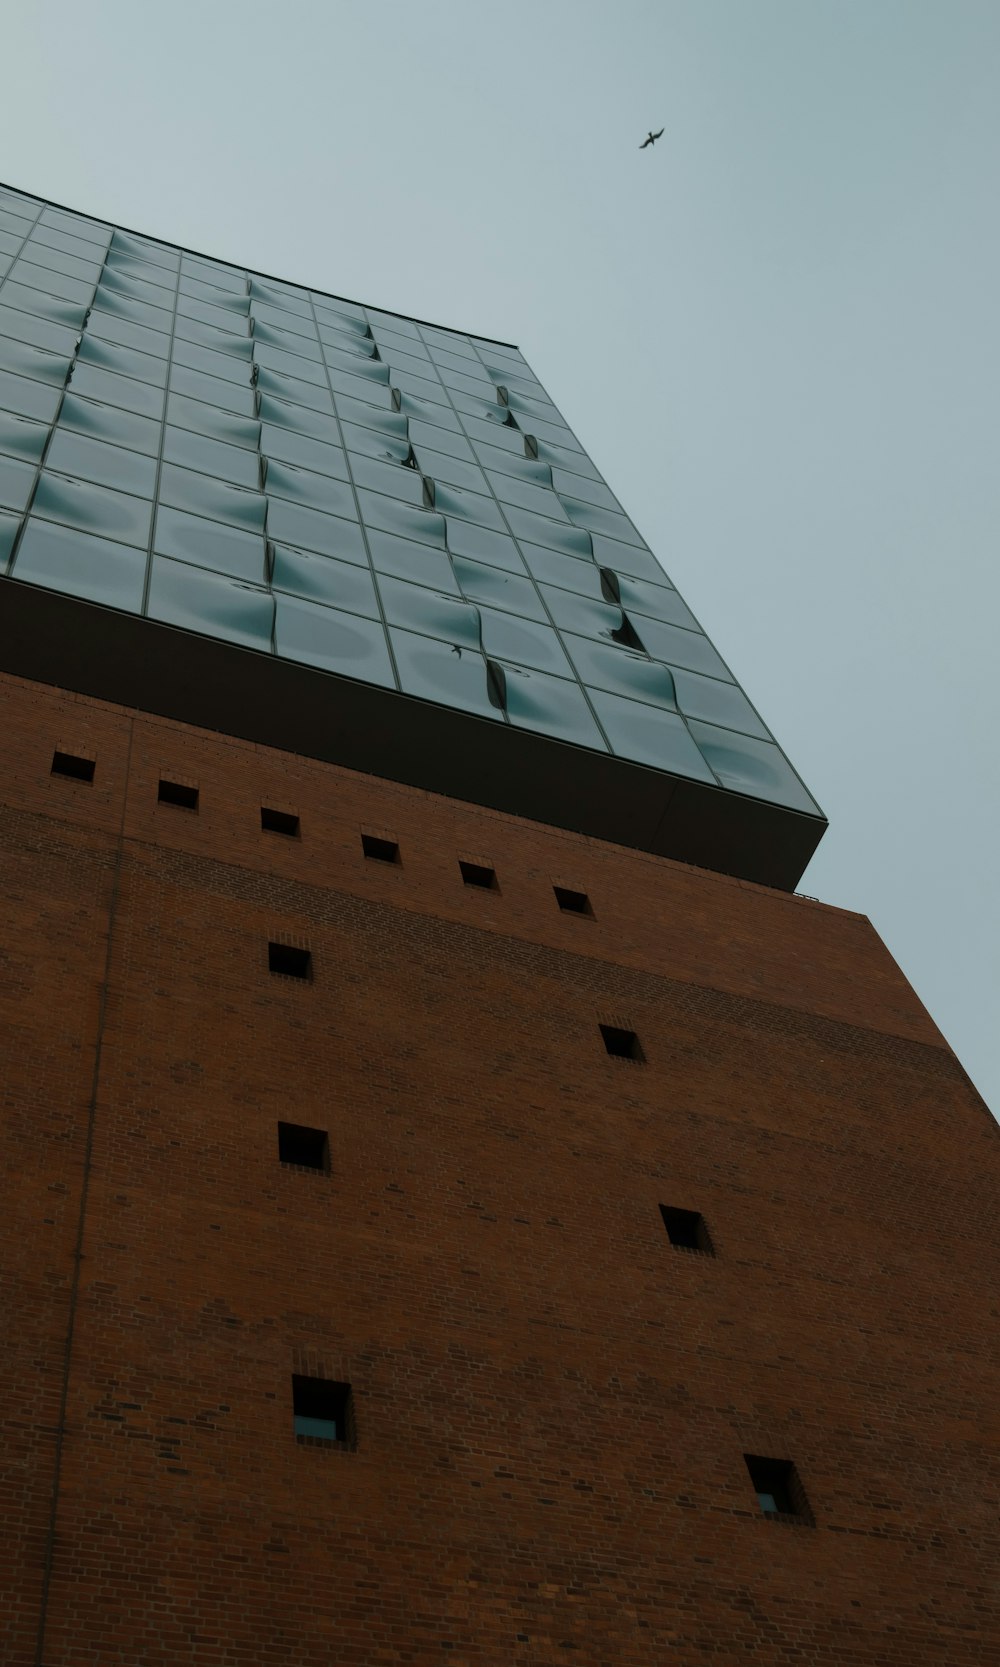 a tall brick building with a plane flying in the sky